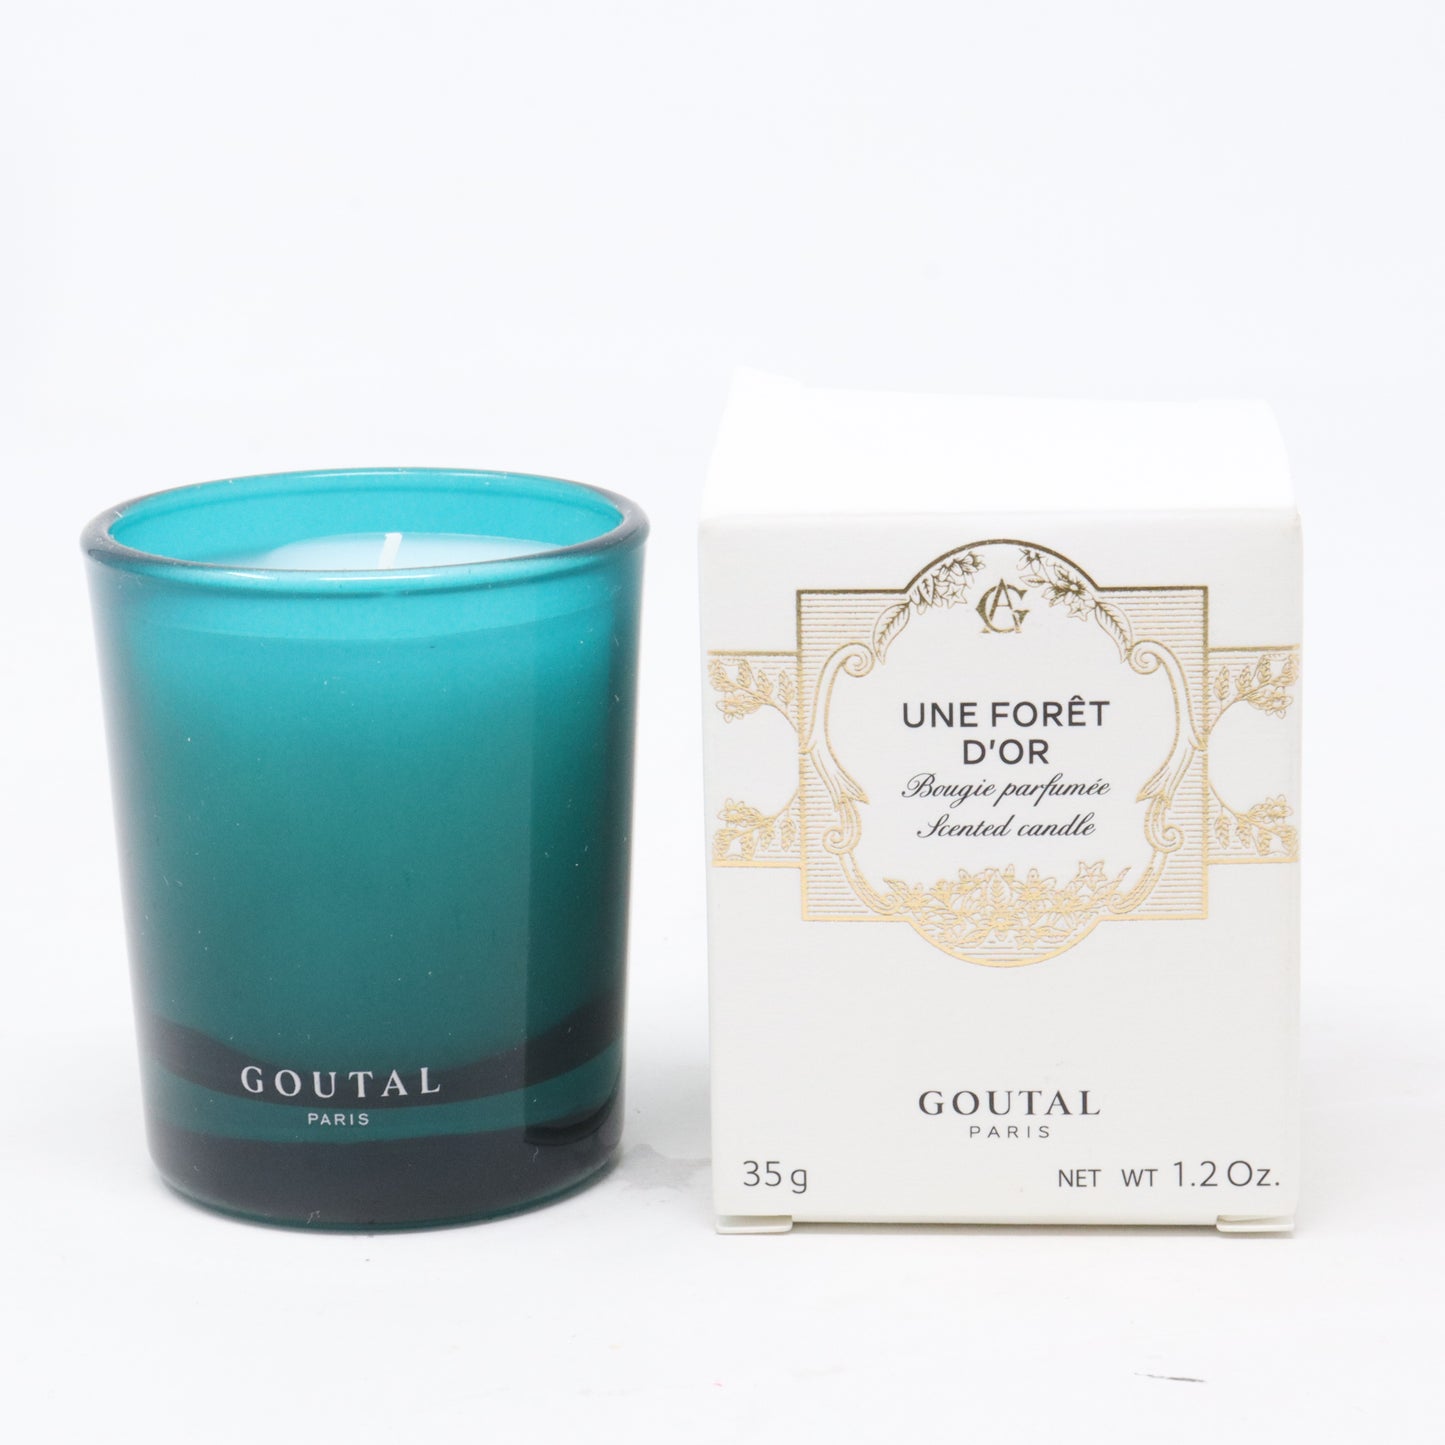 Une Foret D'or Scented Candle 35 g